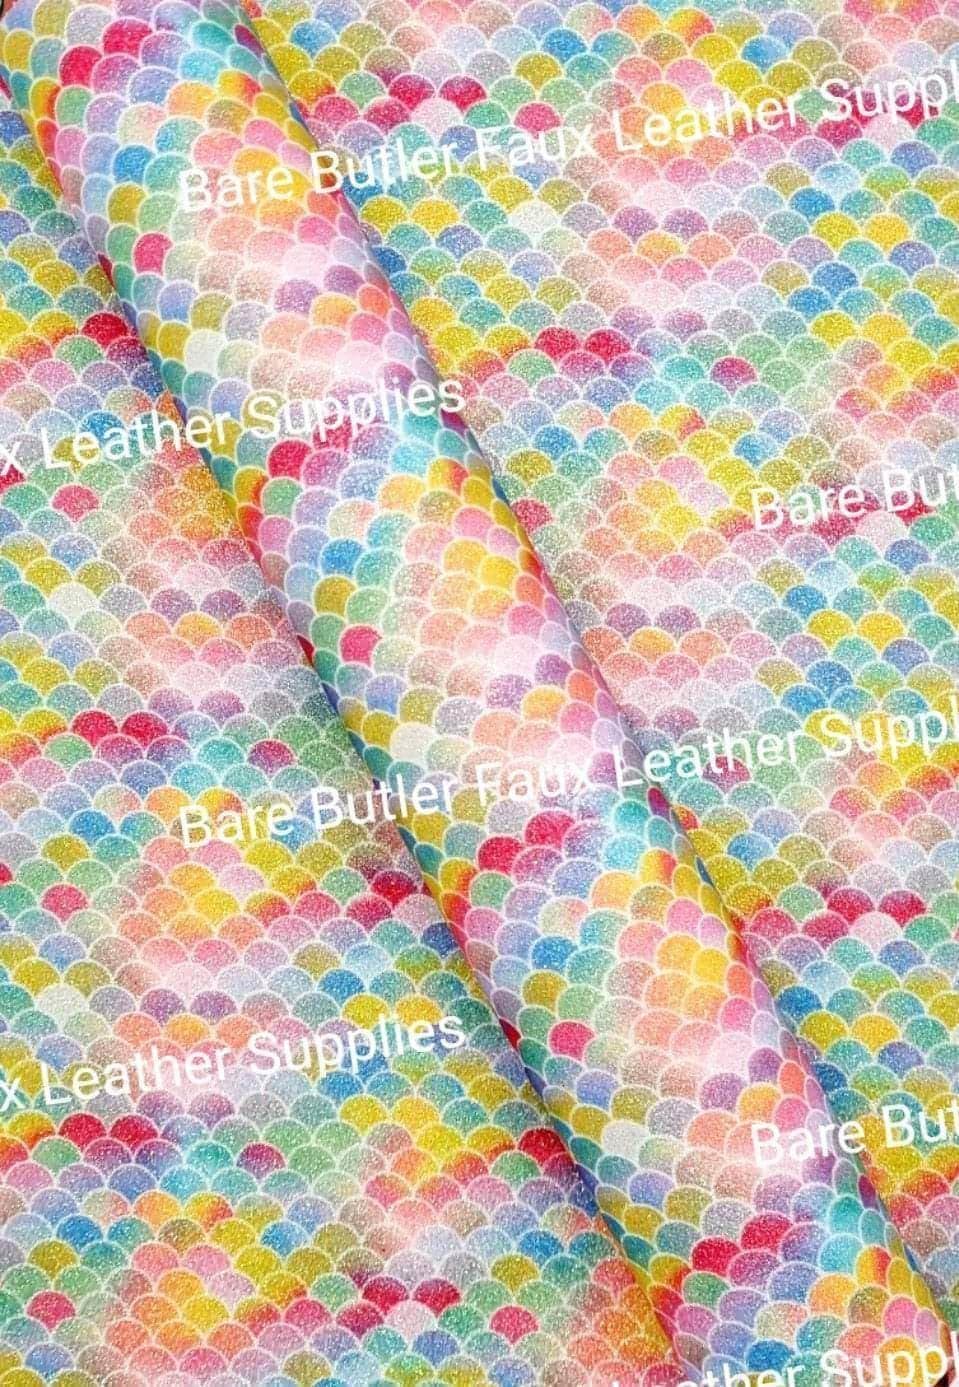 Glitter Scales - Rainbow - Faux, Faux Leather, Fine, Glitter, Leather, leatherette, Rainbow, scales, Super - Bare Butler Faux Leather Supplies 